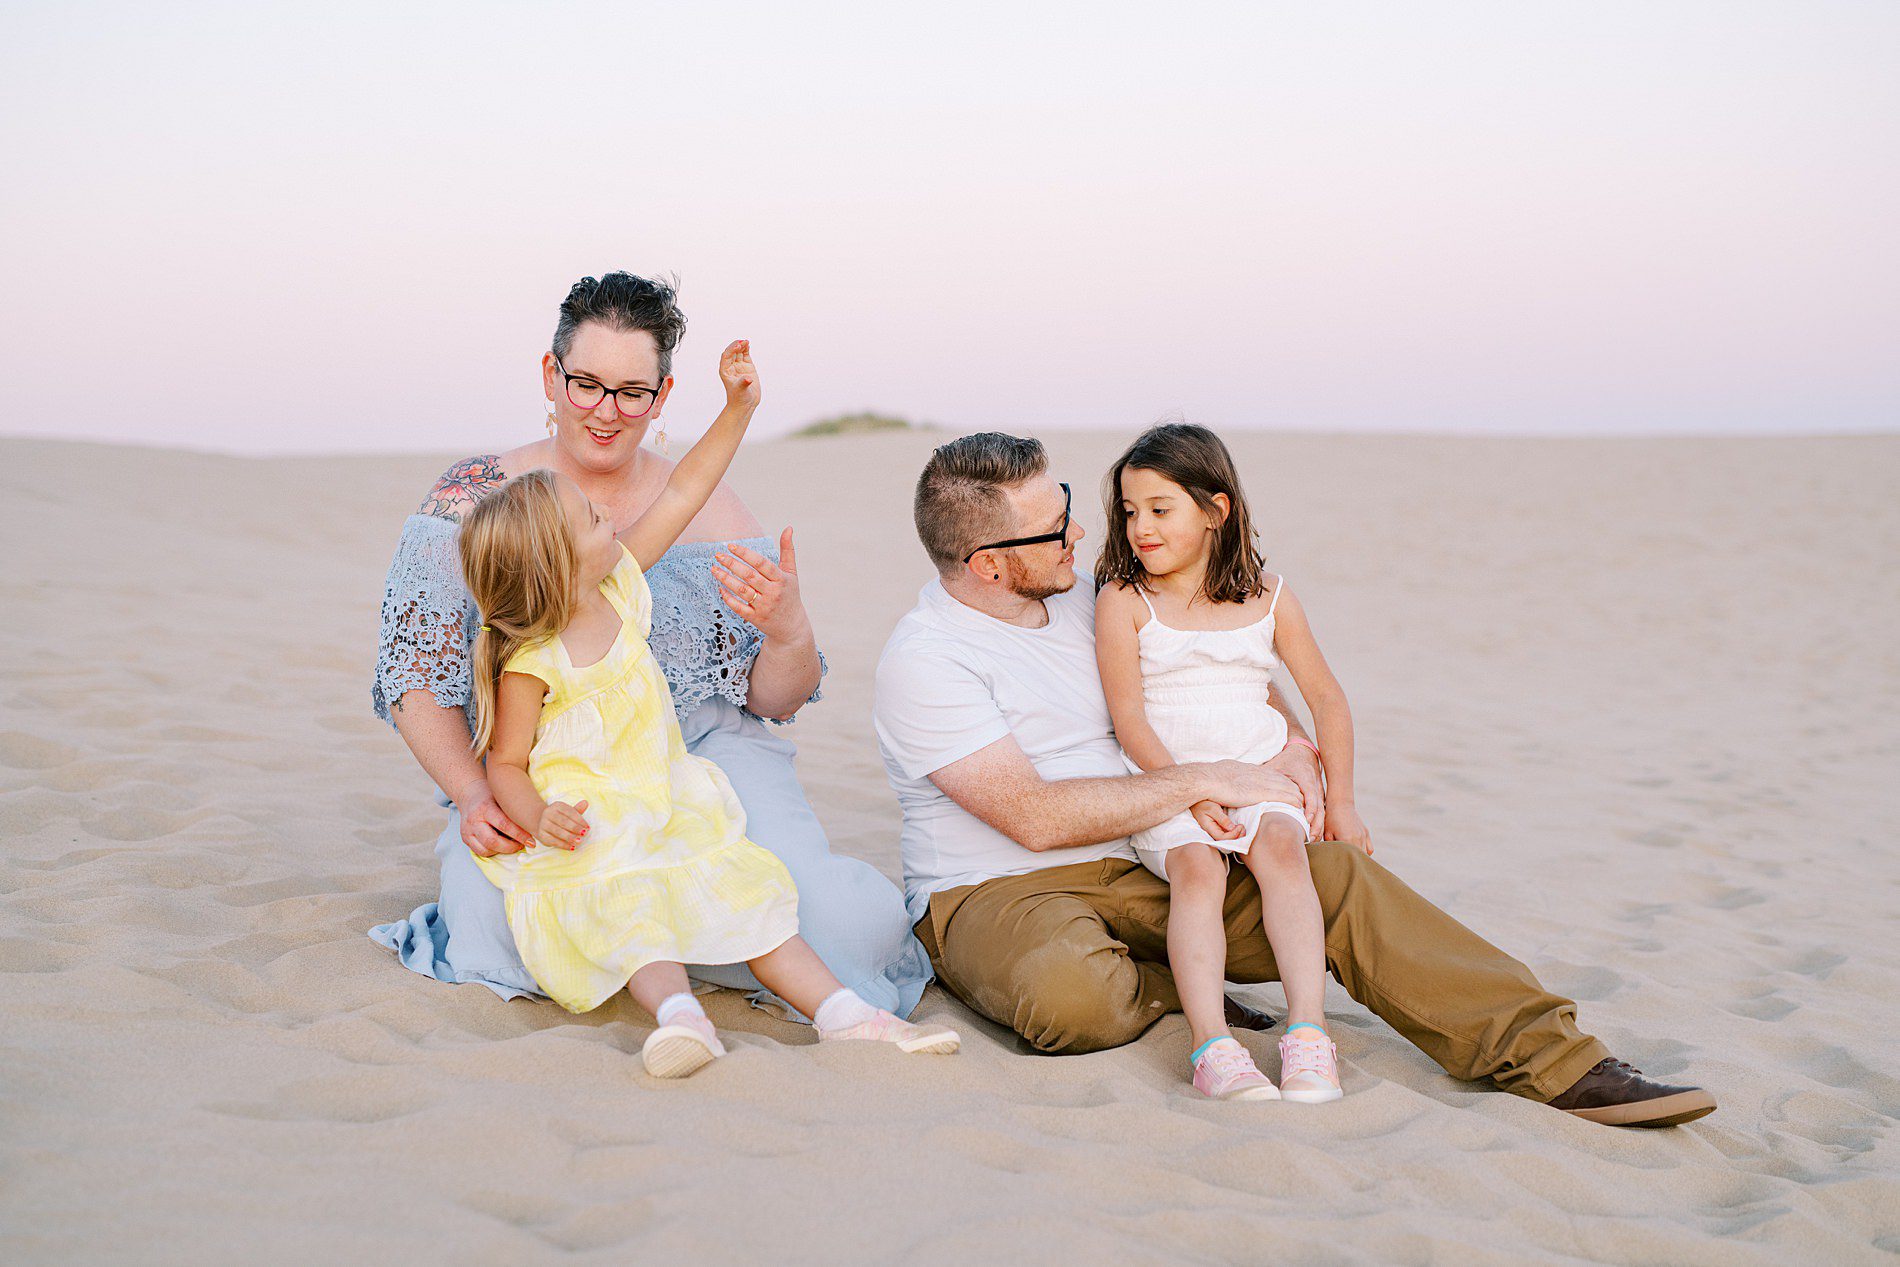 Girls interact with parents at the Oceano Dunes in Pismo Beach by Pismo Beach Family Photographer Austyn Elizabeth Photography